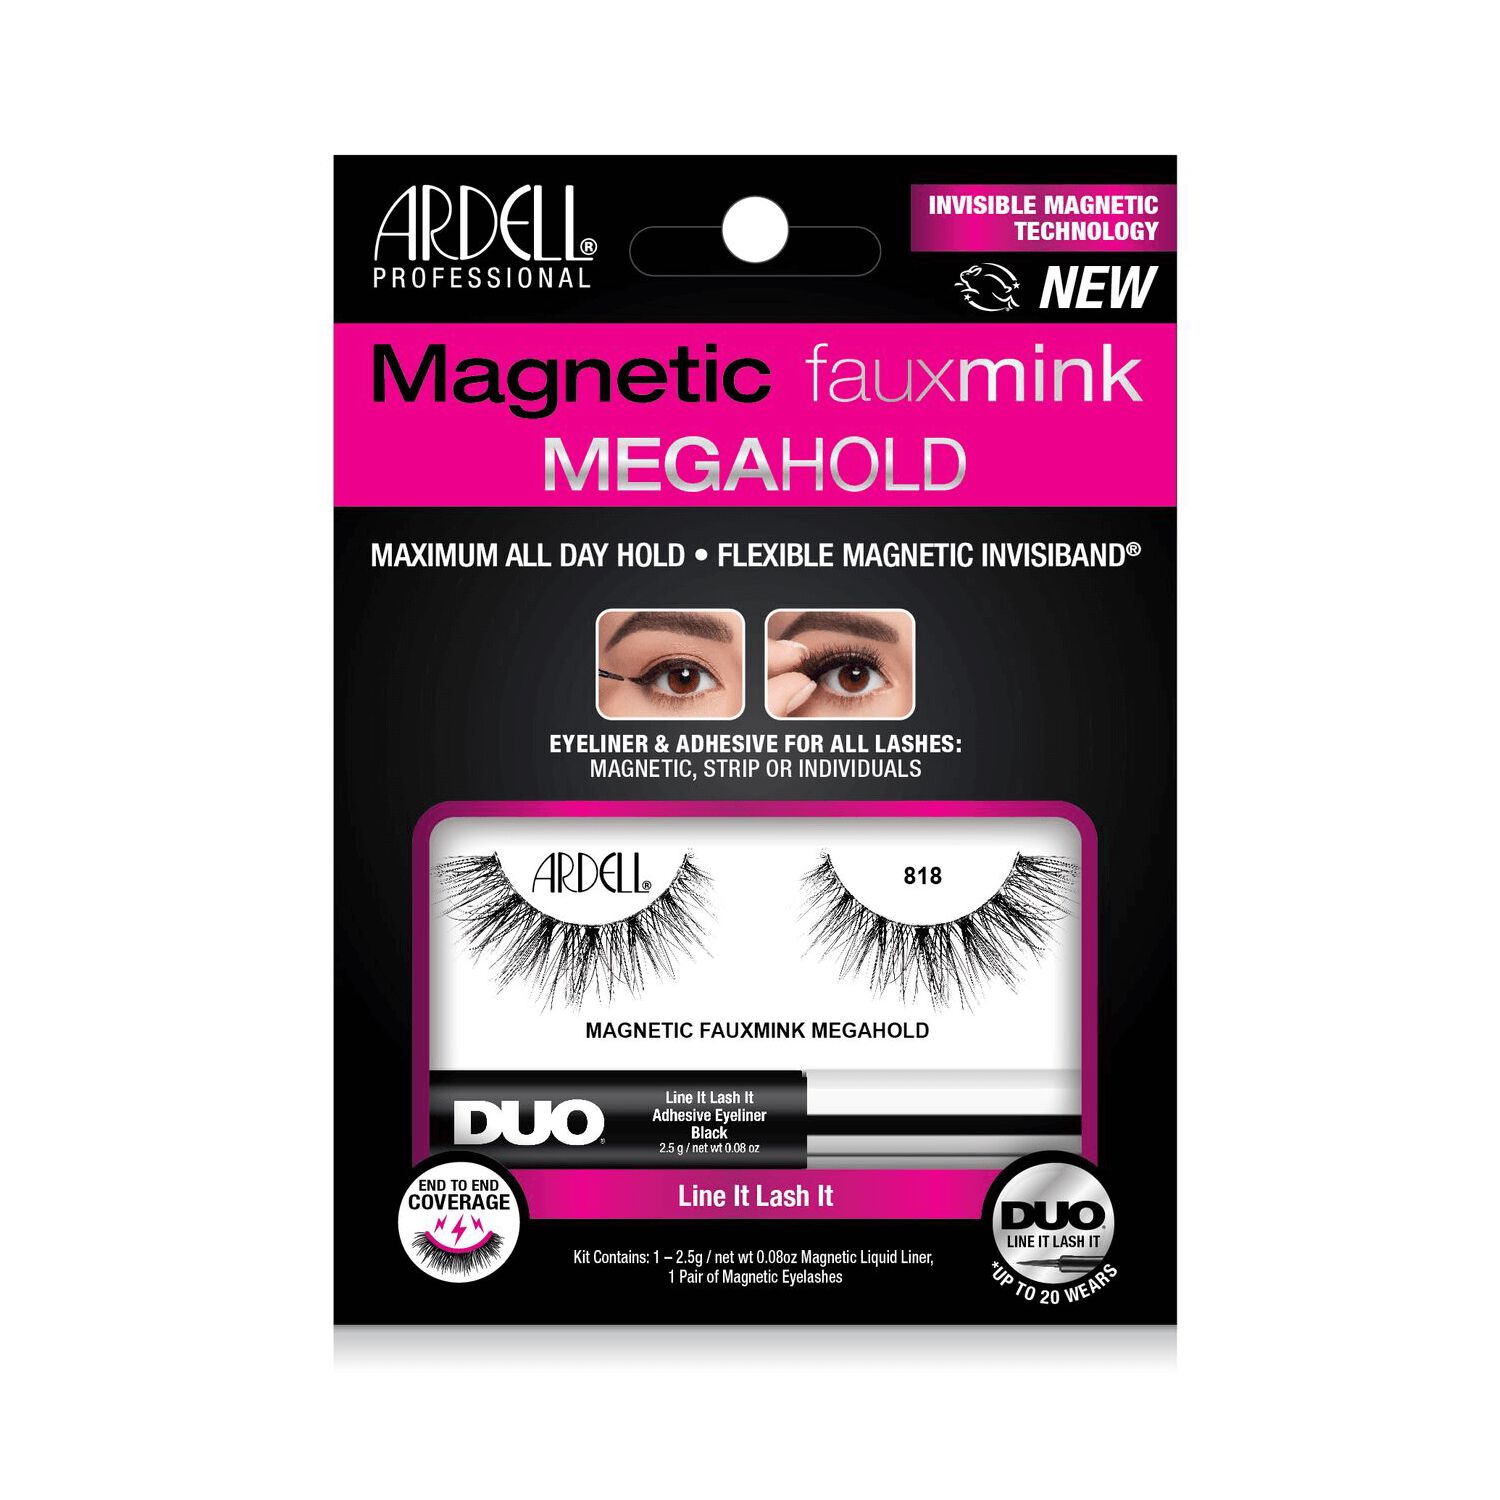 Ardell Magnetic Faux Mink 818 Megahold Liner And Lash Kit Sally Beauty